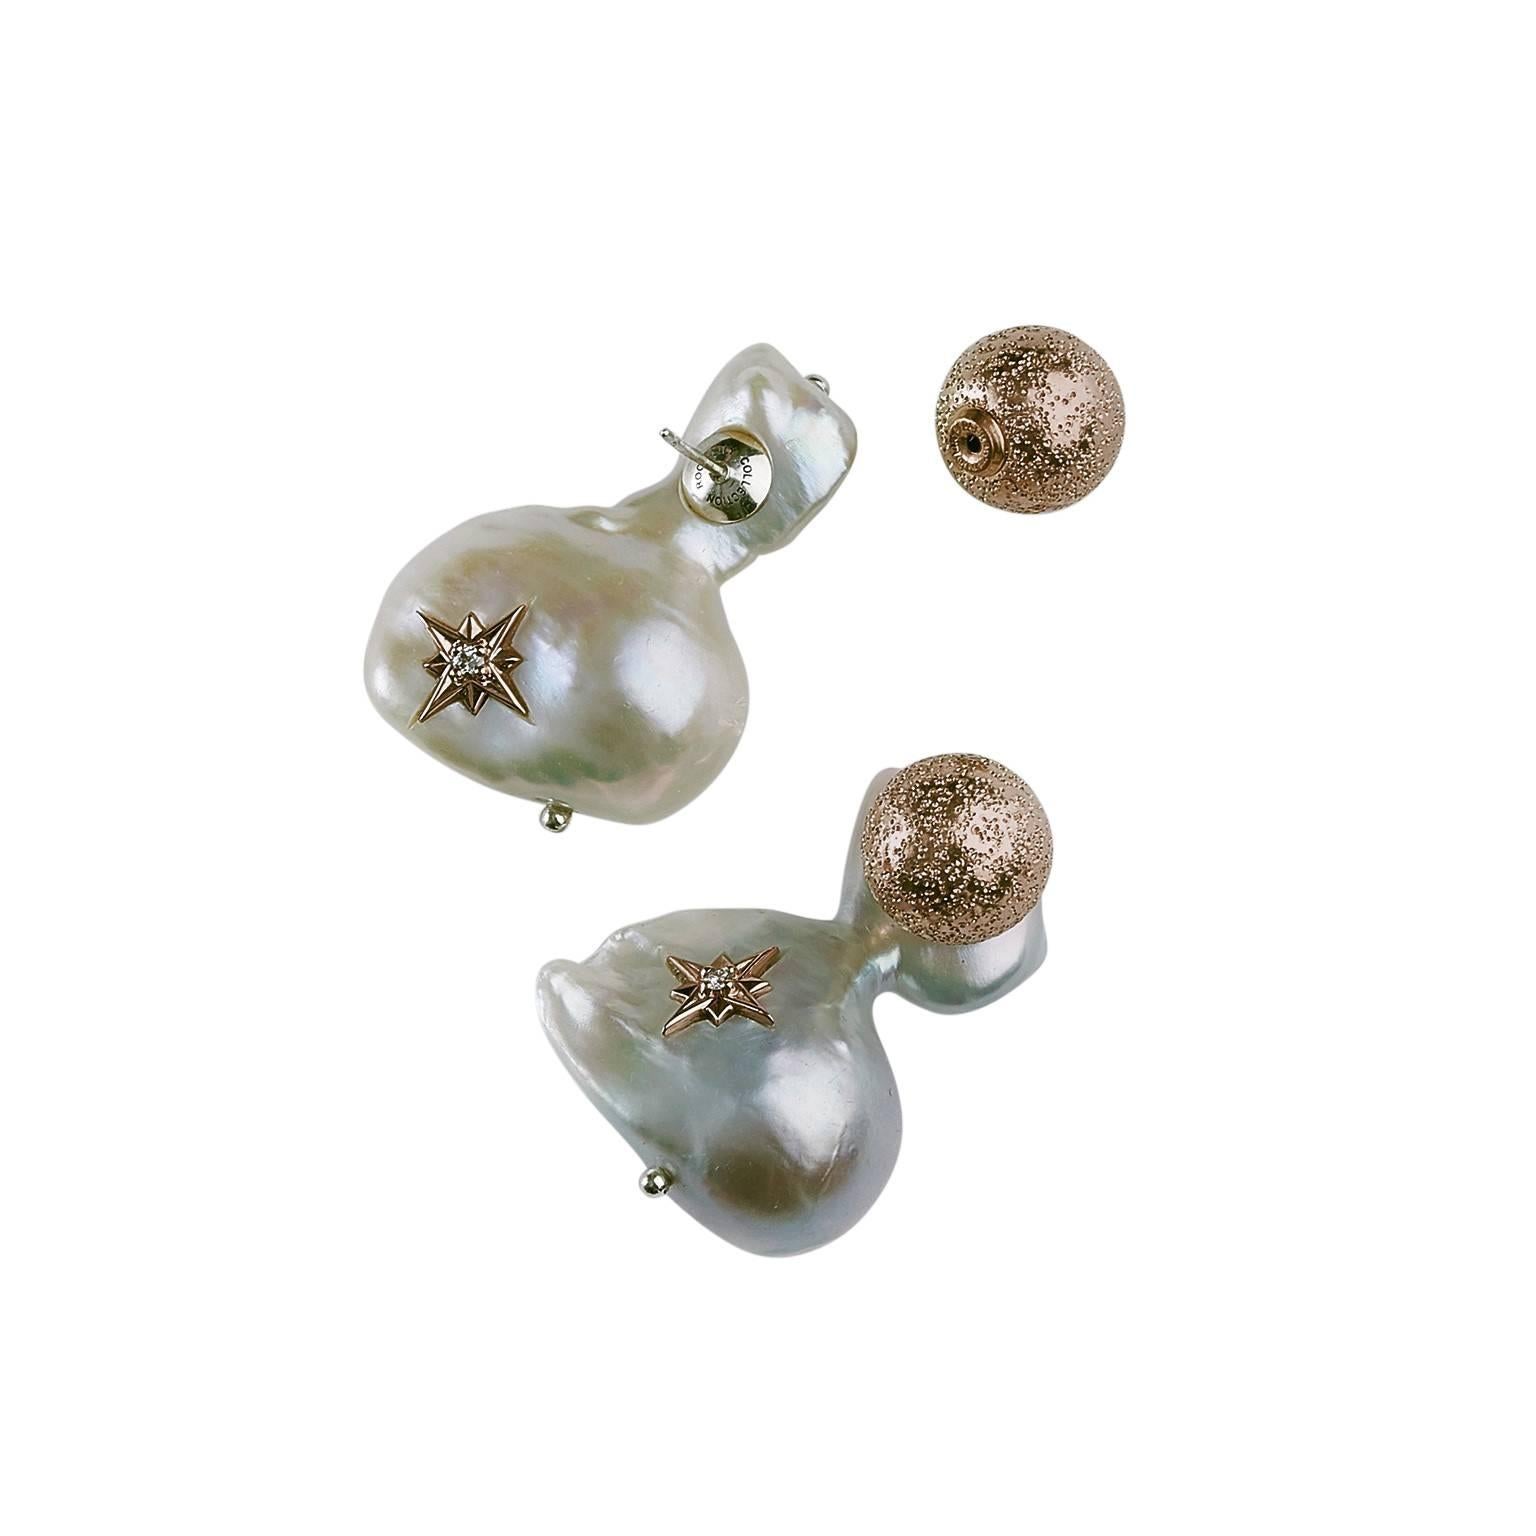 This white baroque cultured massive pearls that made up stud earring. On front sides, 12 mm diamond dust silver beads covered in 14k rose gold.
The natural formed freshwater pearl earrings measurement detail  is  32.13 x 25.91 mm  ( 1.3 x 1.02 in ),